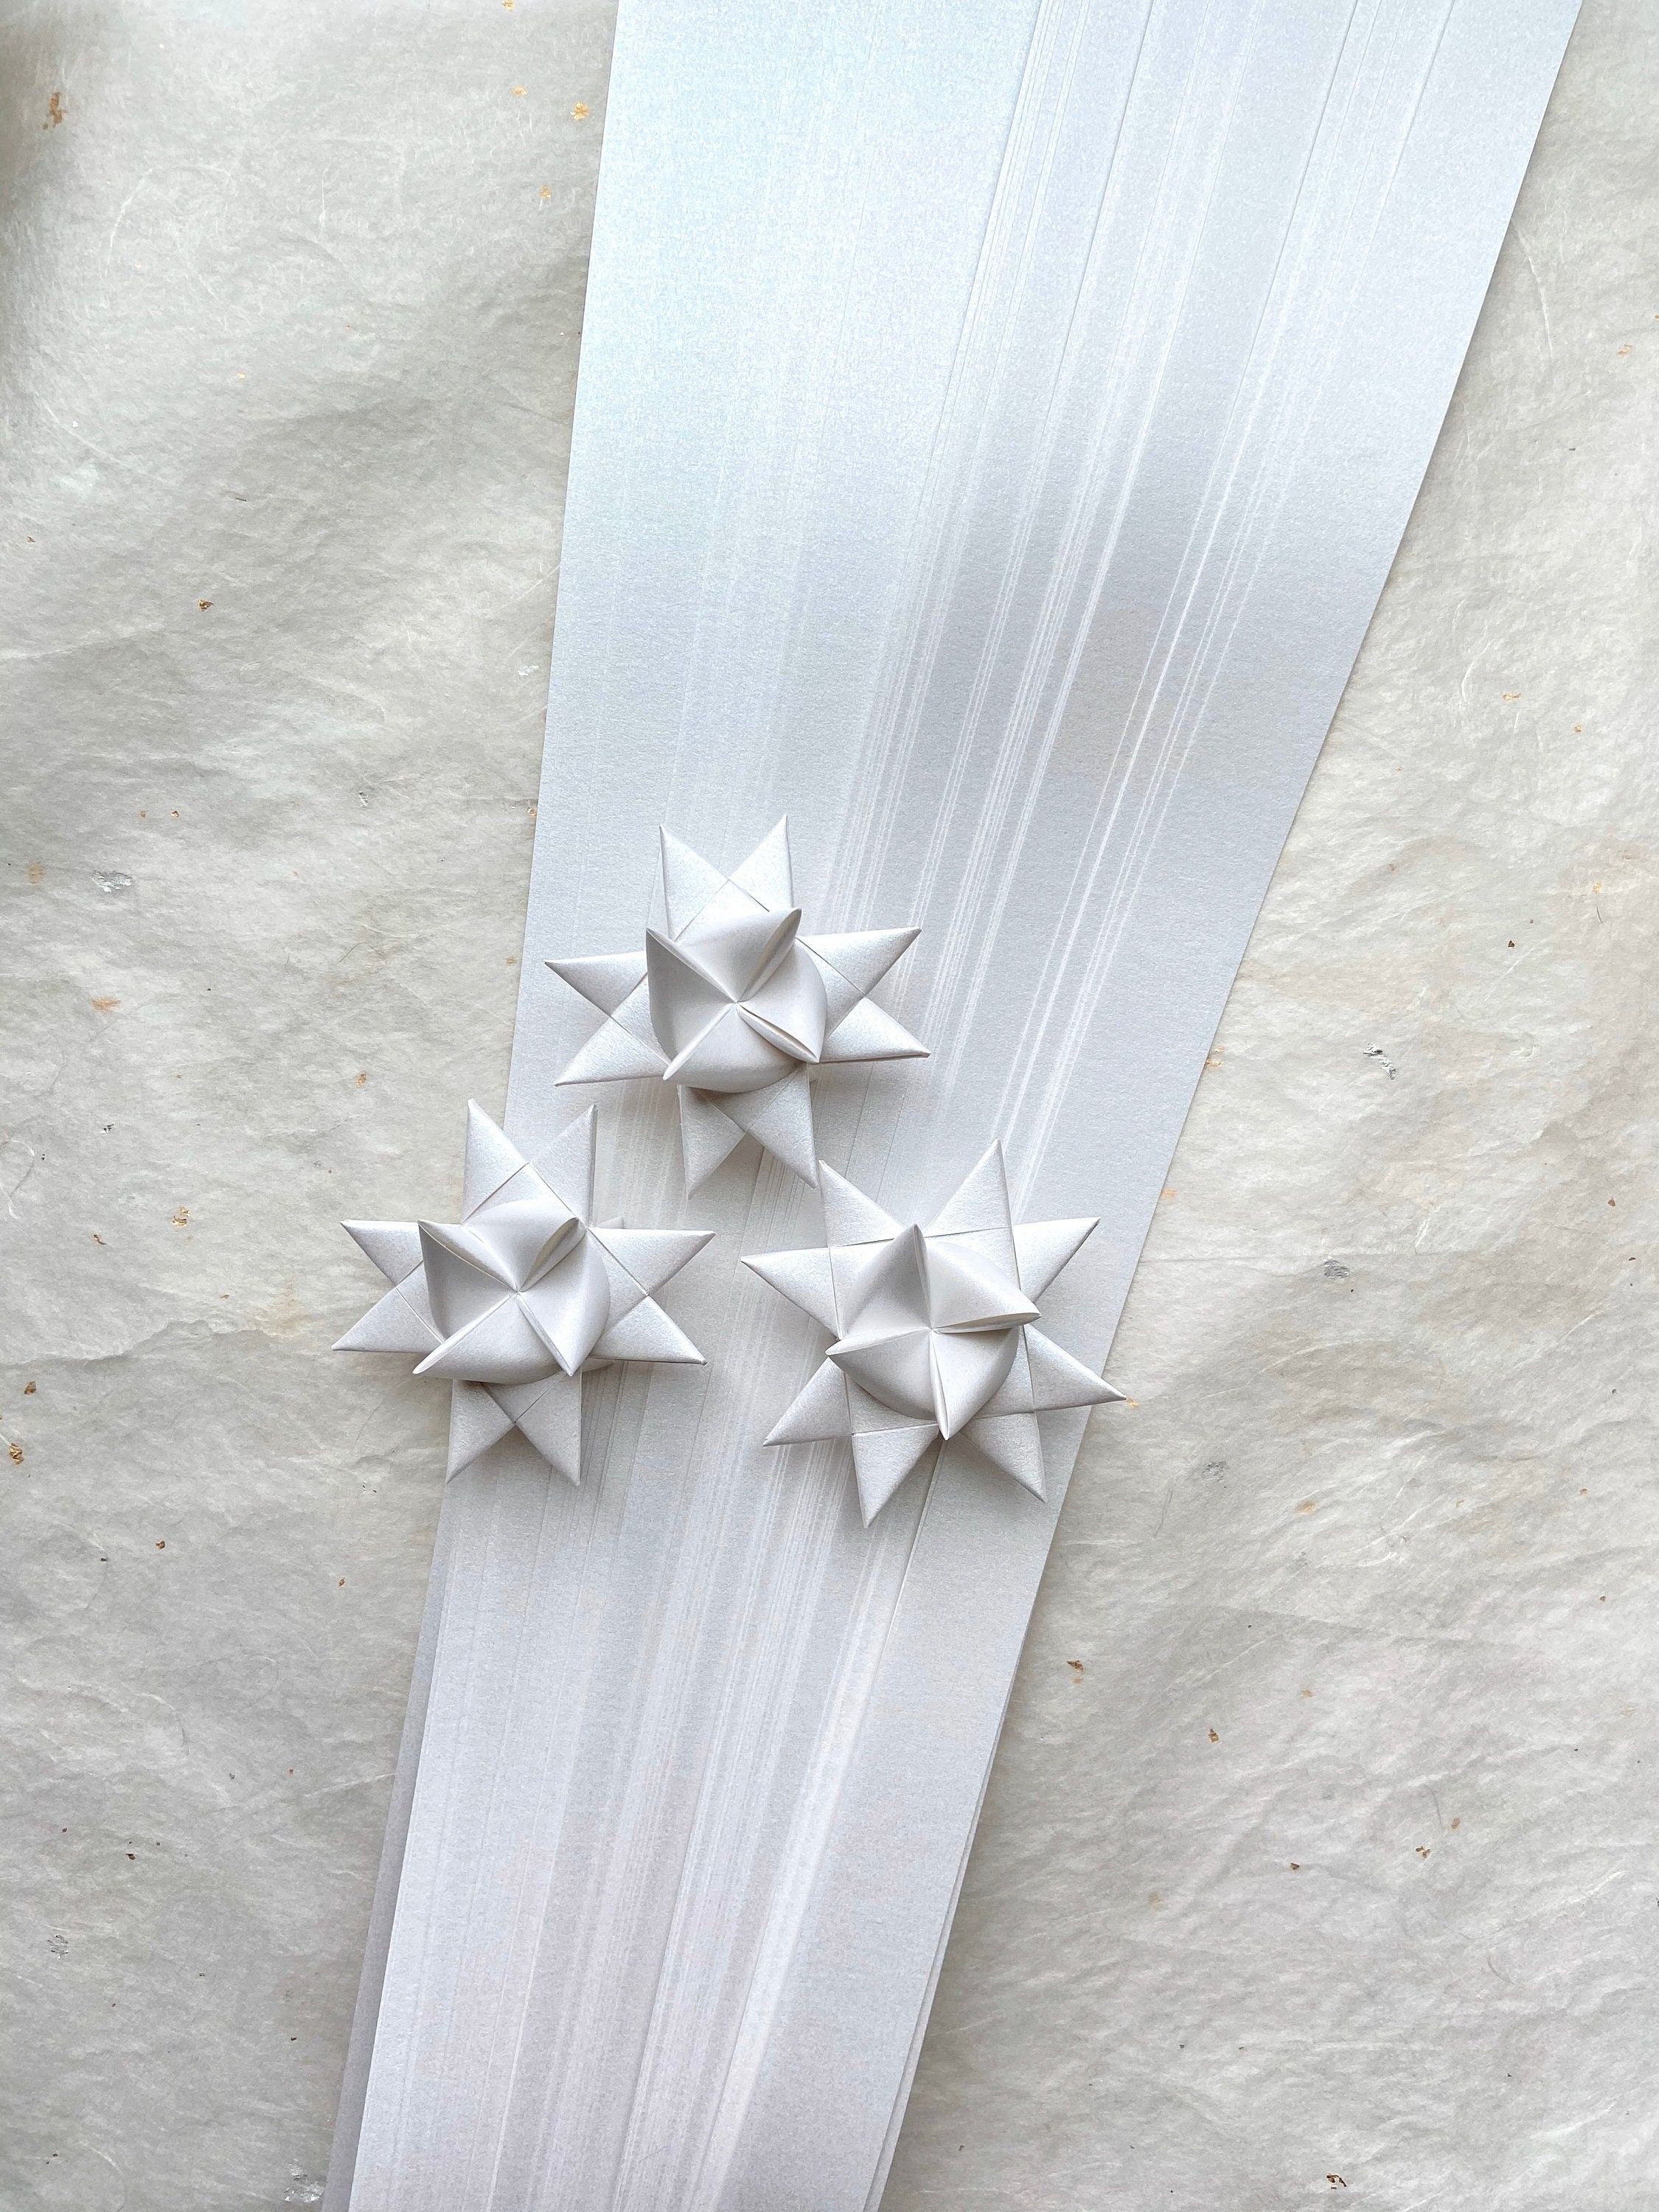 Shimmer Pearl Froebel Moravian German Star Paper Origami Ornaments  Traditional DIY Weaving Craft Projects 50 Strips 